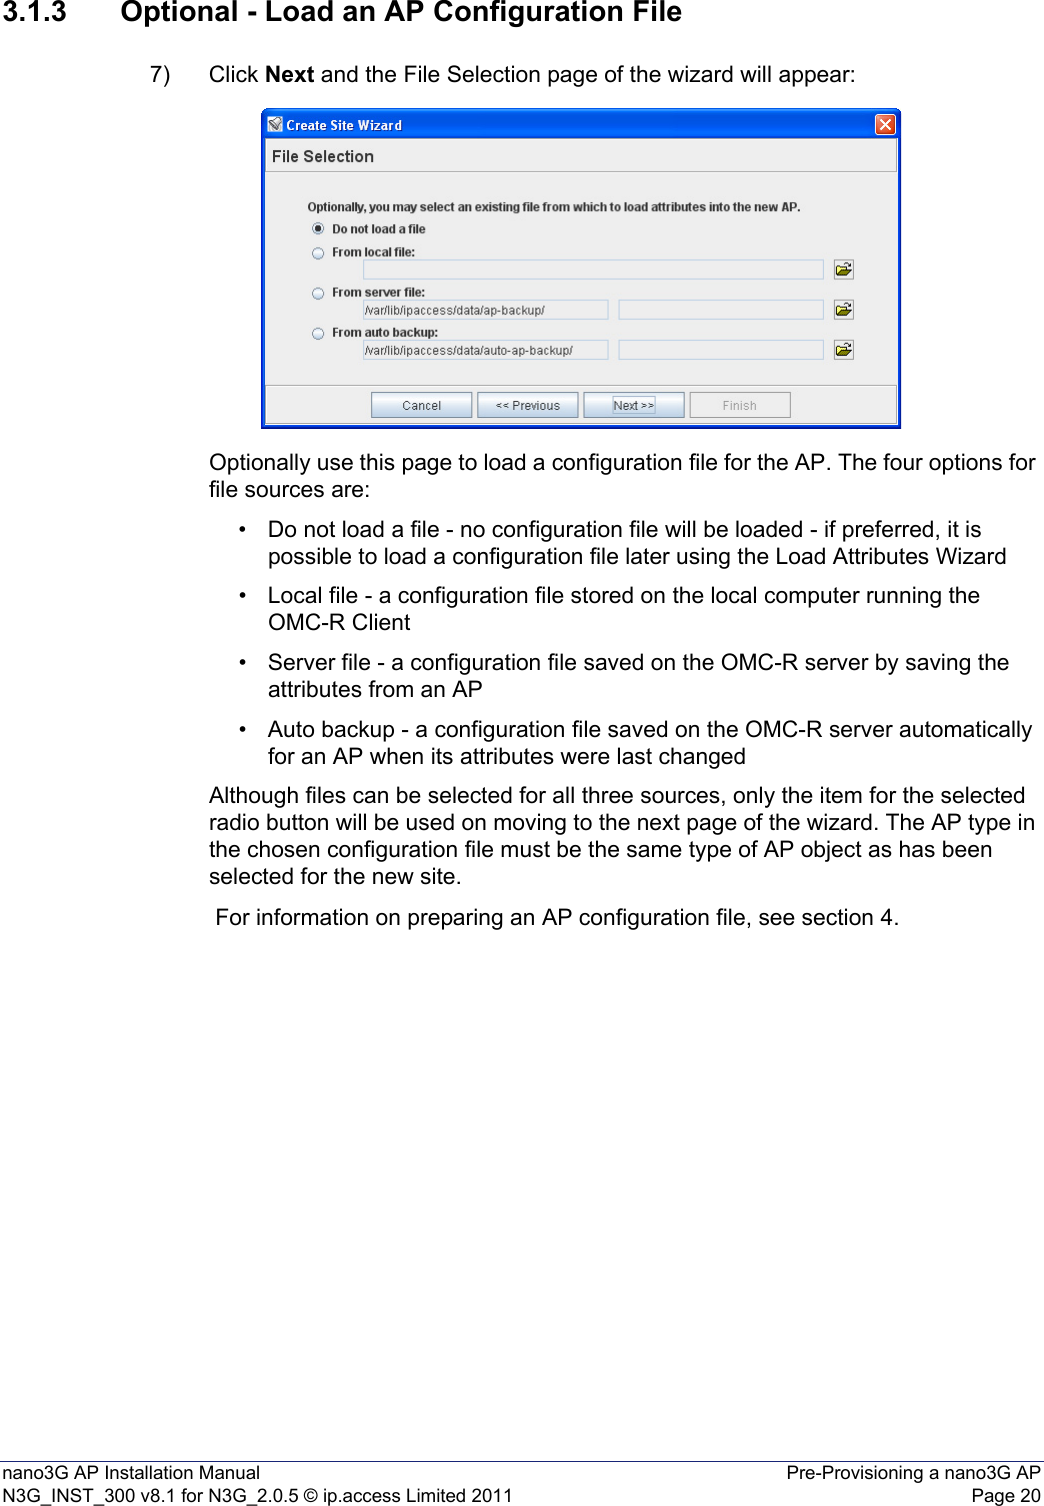 nano3G AP Installation Manual Pre-Provisioning a nano3G APN3G_INST_300 v8.1 for N3G_2.0.5 © ip.access Limited 2011 Page 203.1.3 Optional - Load an AP Configuration File7) Click Next and the File Selection page of the wizard will appear:Optionally use this page to load a configuration file for the AP. The four options for file sources are:• Do not load a file - no configuration file will be loaded - if preferred, it is possible to load a configuration file later using the Load Attributes Wizard• Local file - a configuration file stored on the local computer running the OMC-R Client • Server file - a configuration file saved on the OMC-R server by saving the attributes from an AP • Auto backup - a configuration file saved on the OMC-R server automatically for an AP when its attributes were last changed Although files can be selected for all three sources, only the item for the selected radio button will be used on moving to the next page of the wizard. The AP type in the chosen configuration file must be the same type of AP object as has been selected for the new site. For information on preparing an AP configuration file, see section 4.